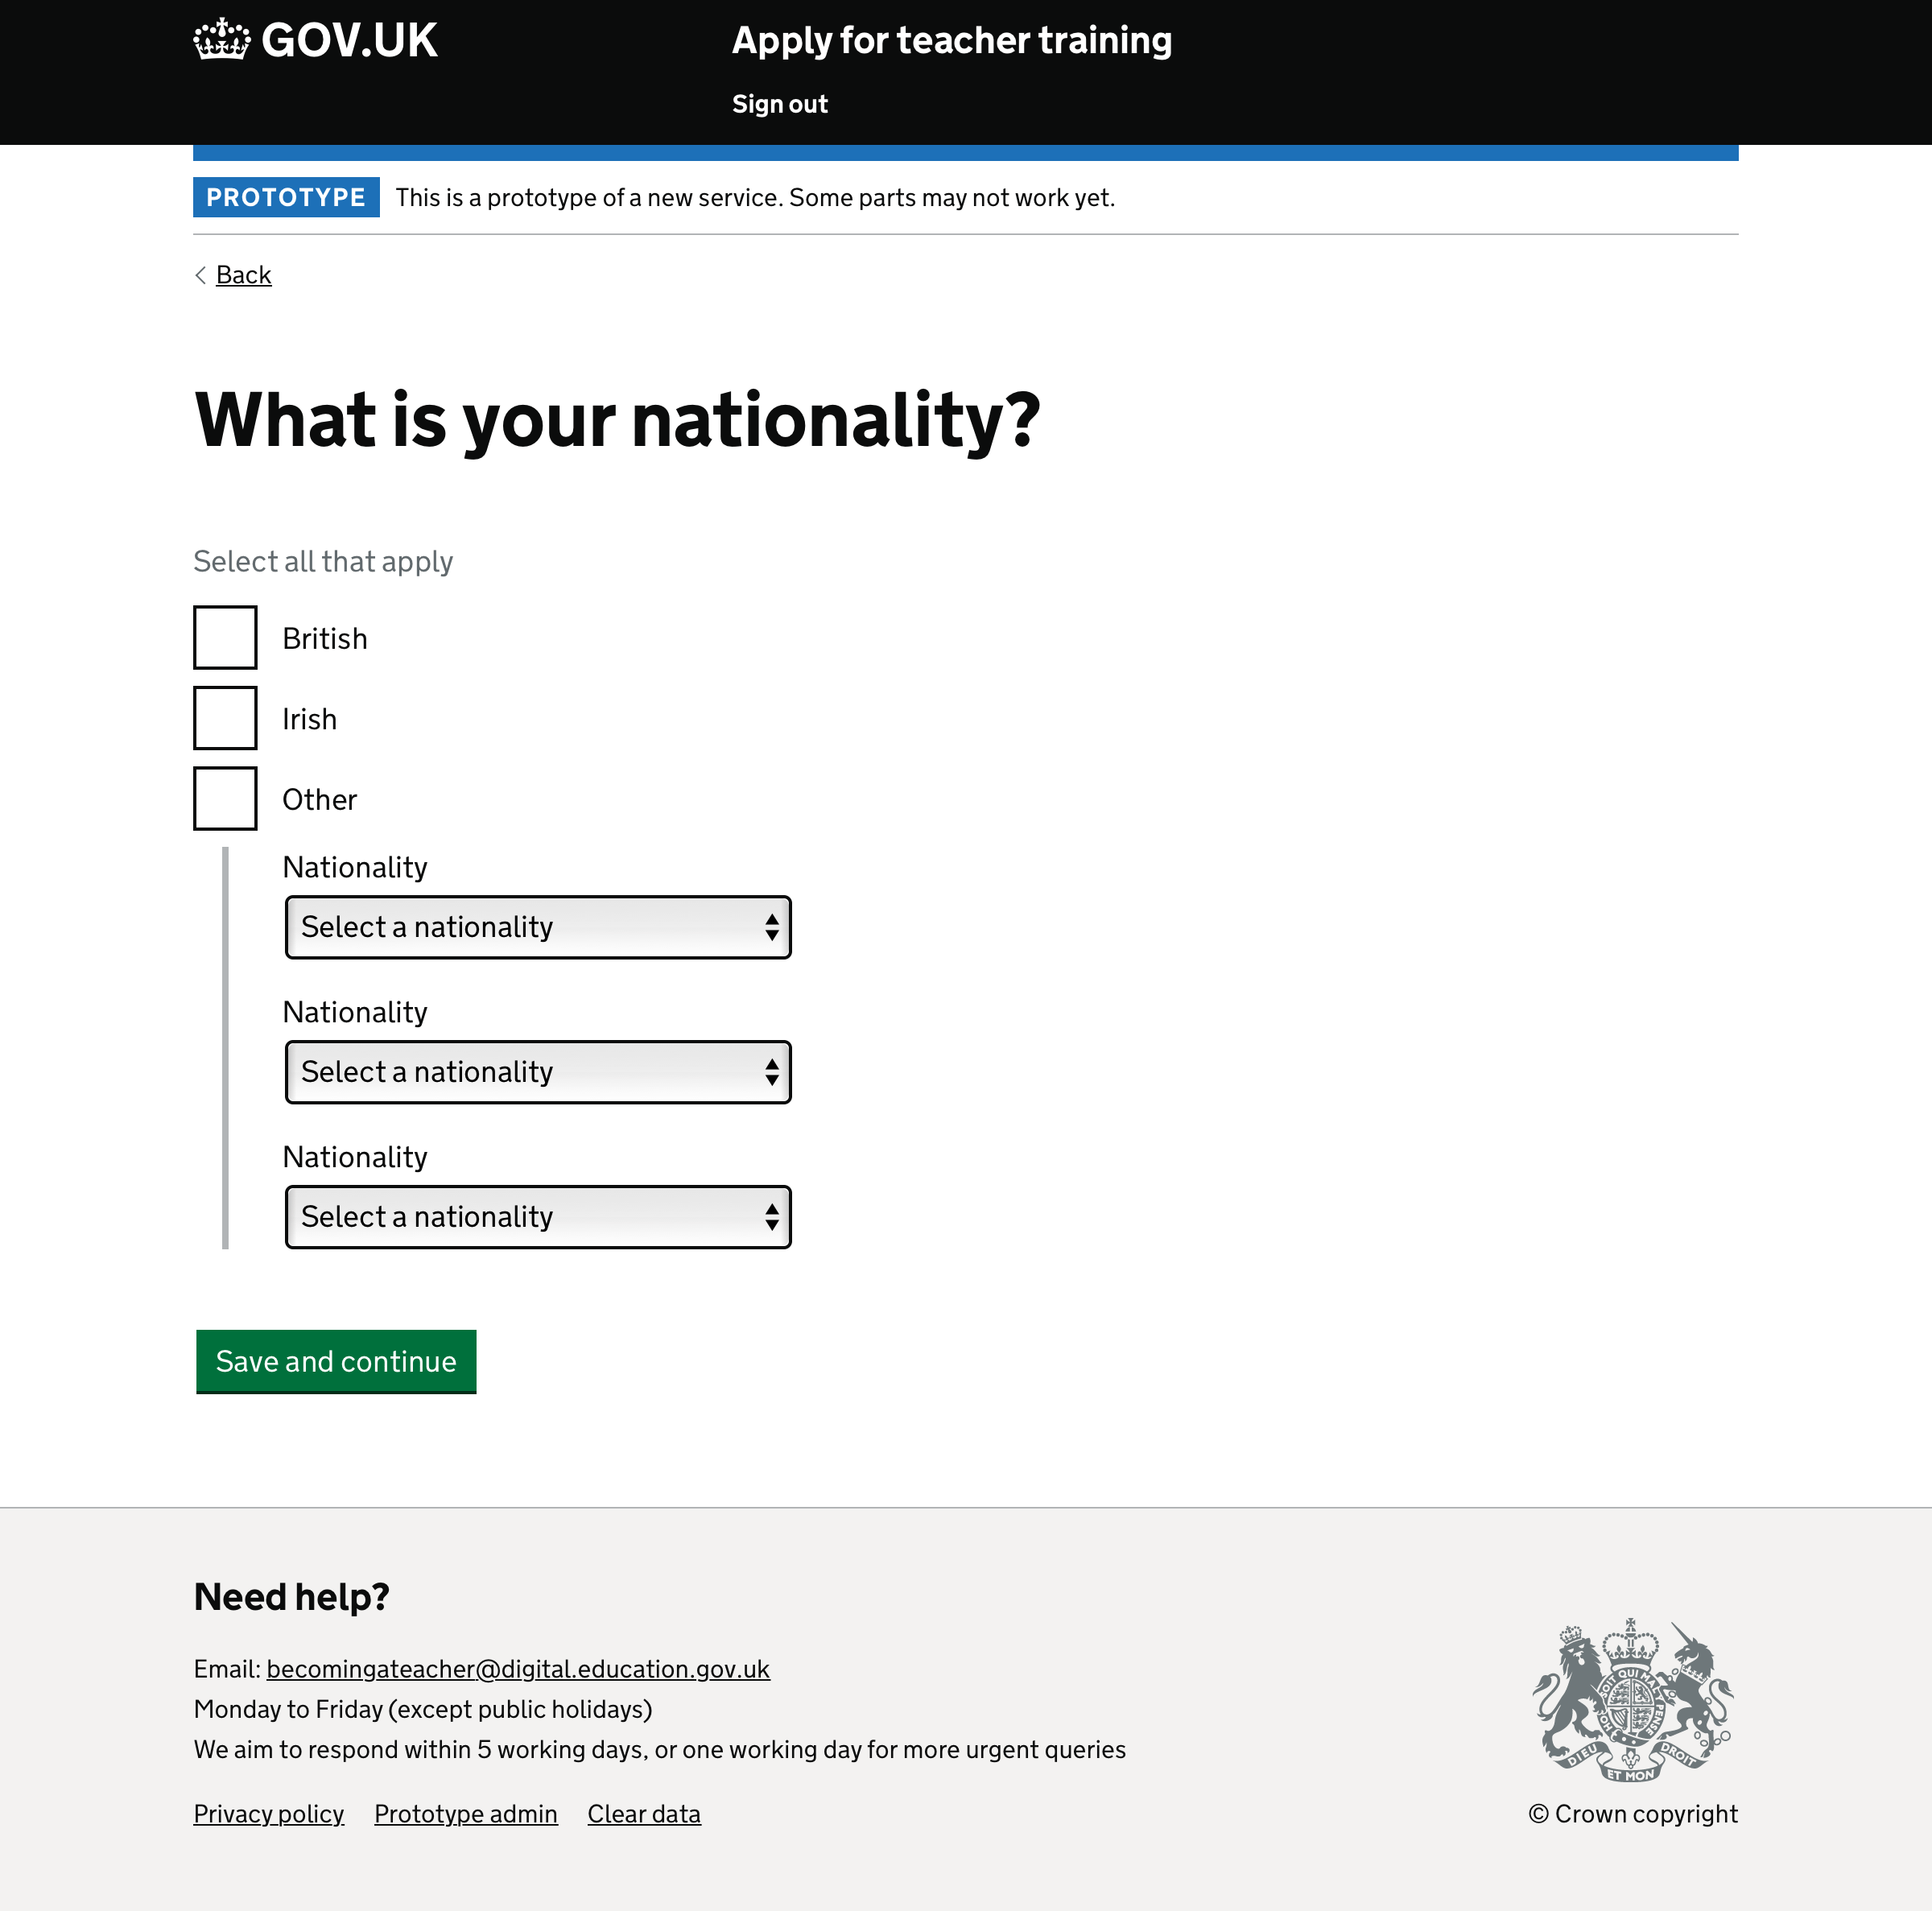 Nationality question with JavaScript disabled.